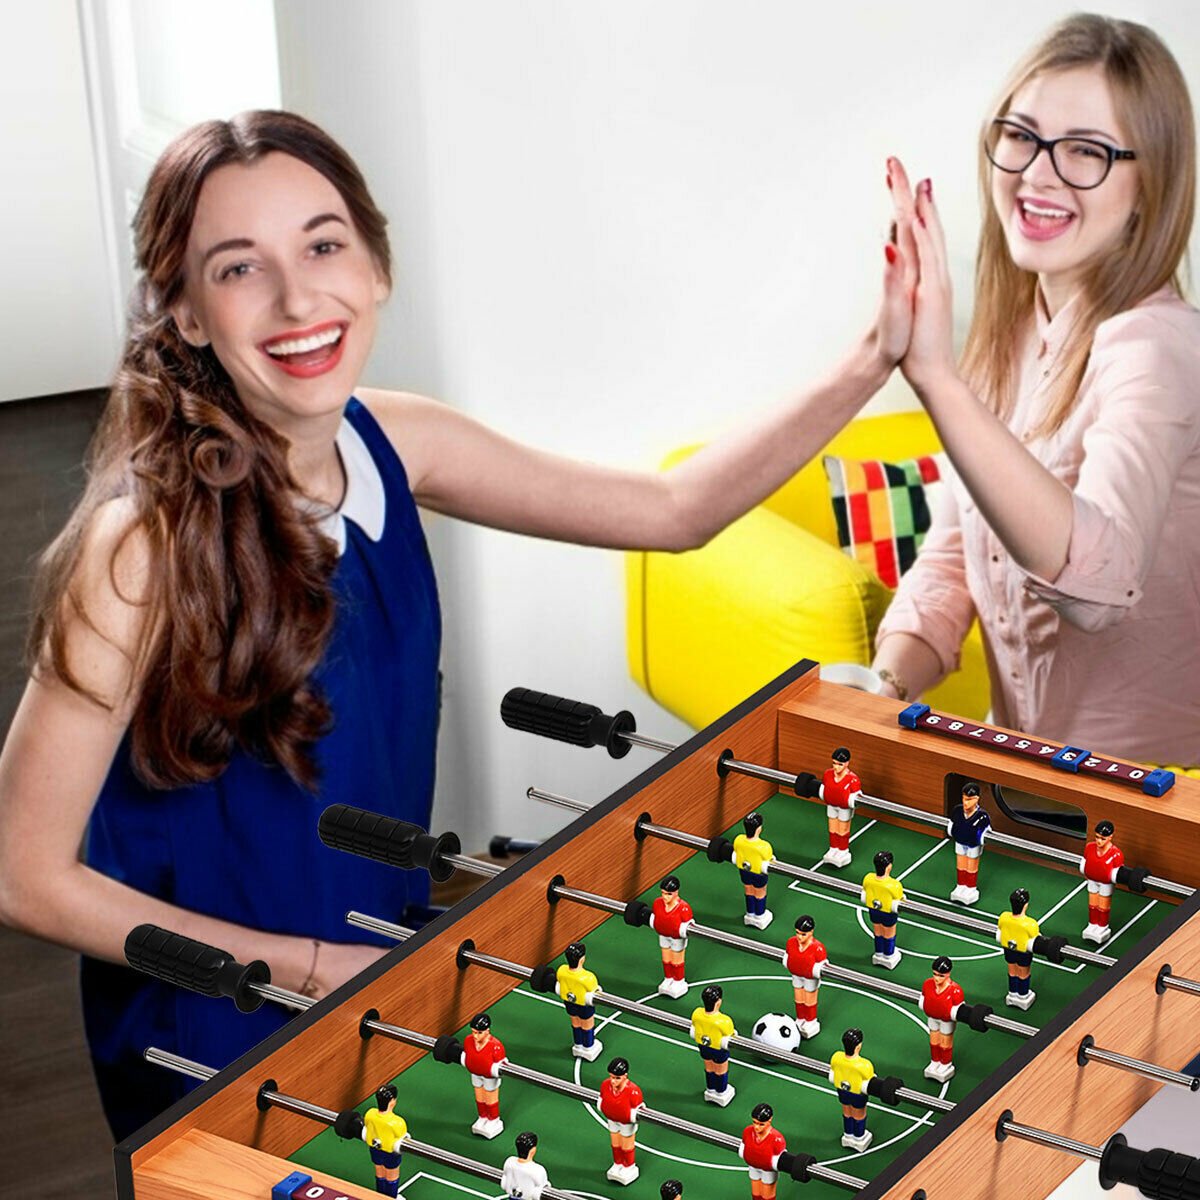 Score Big with Our Football Table Game Set - Buy Today!